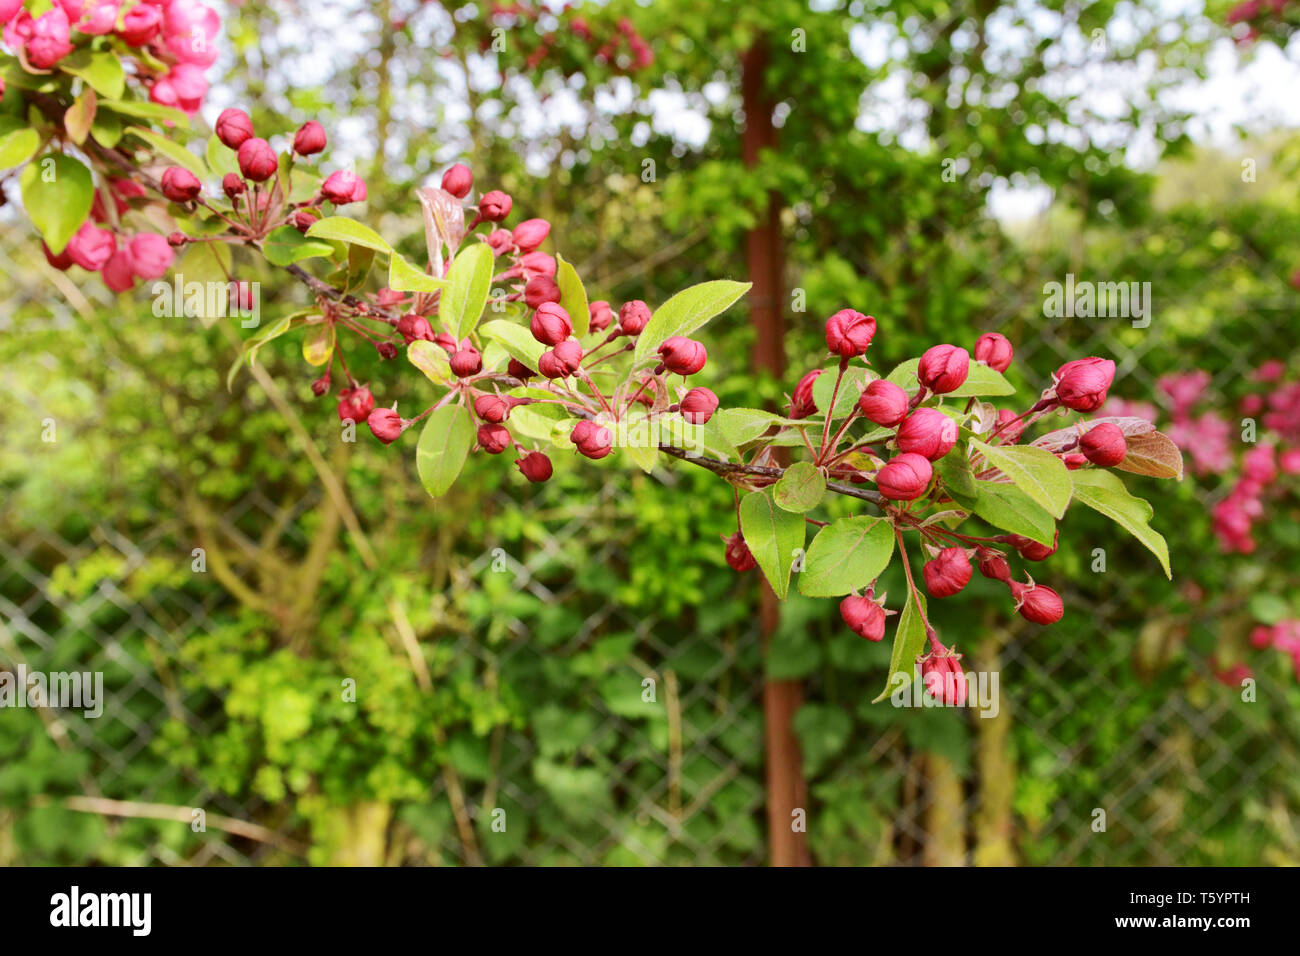 Long tree branch covered with deep pink blossom buds in selective focus against verdant green foliage Stock Photo